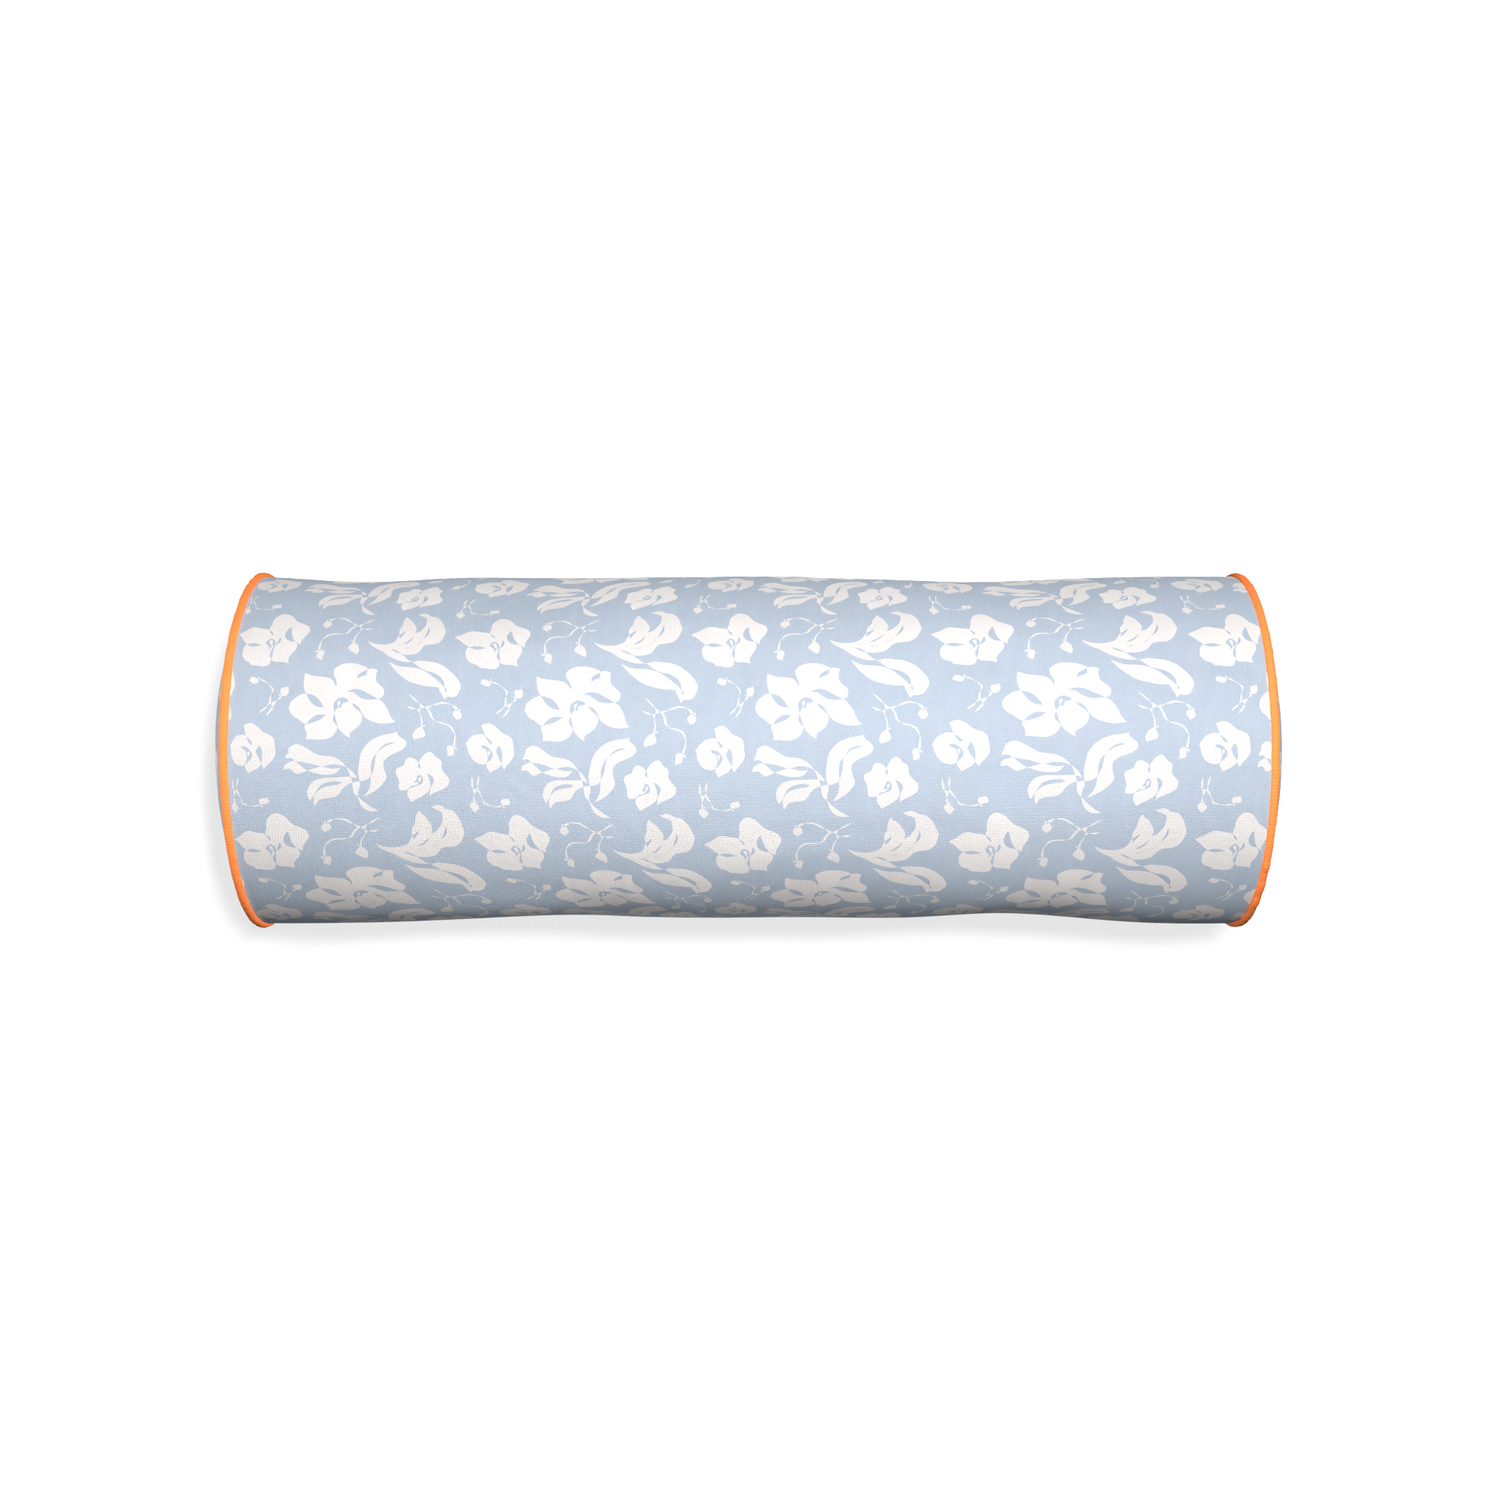 Bolster georgia custom cornflower blue floralpillow with clementine piping on white background